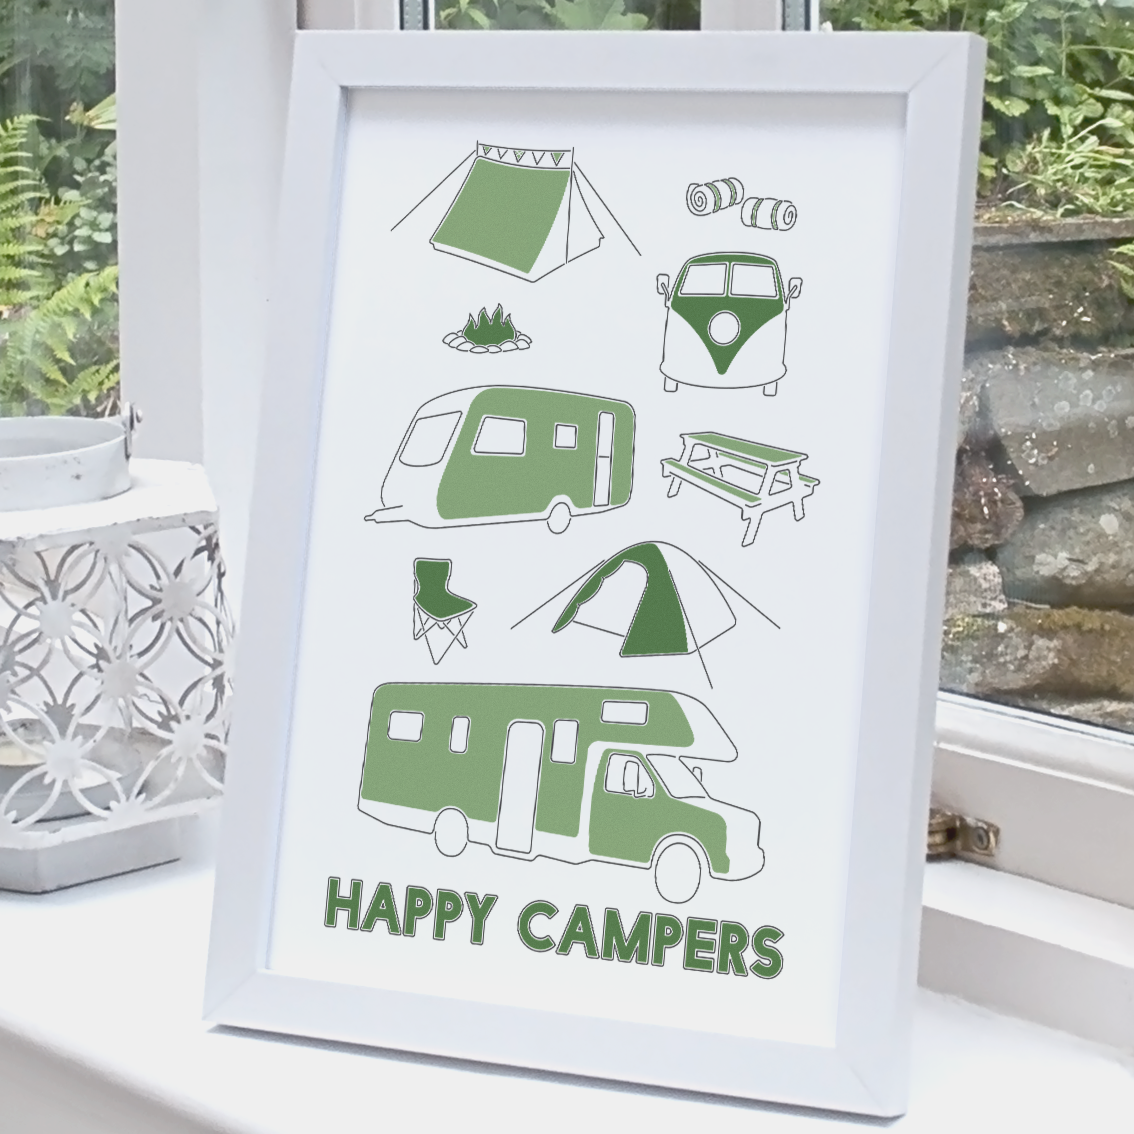 Camping print white frame standing